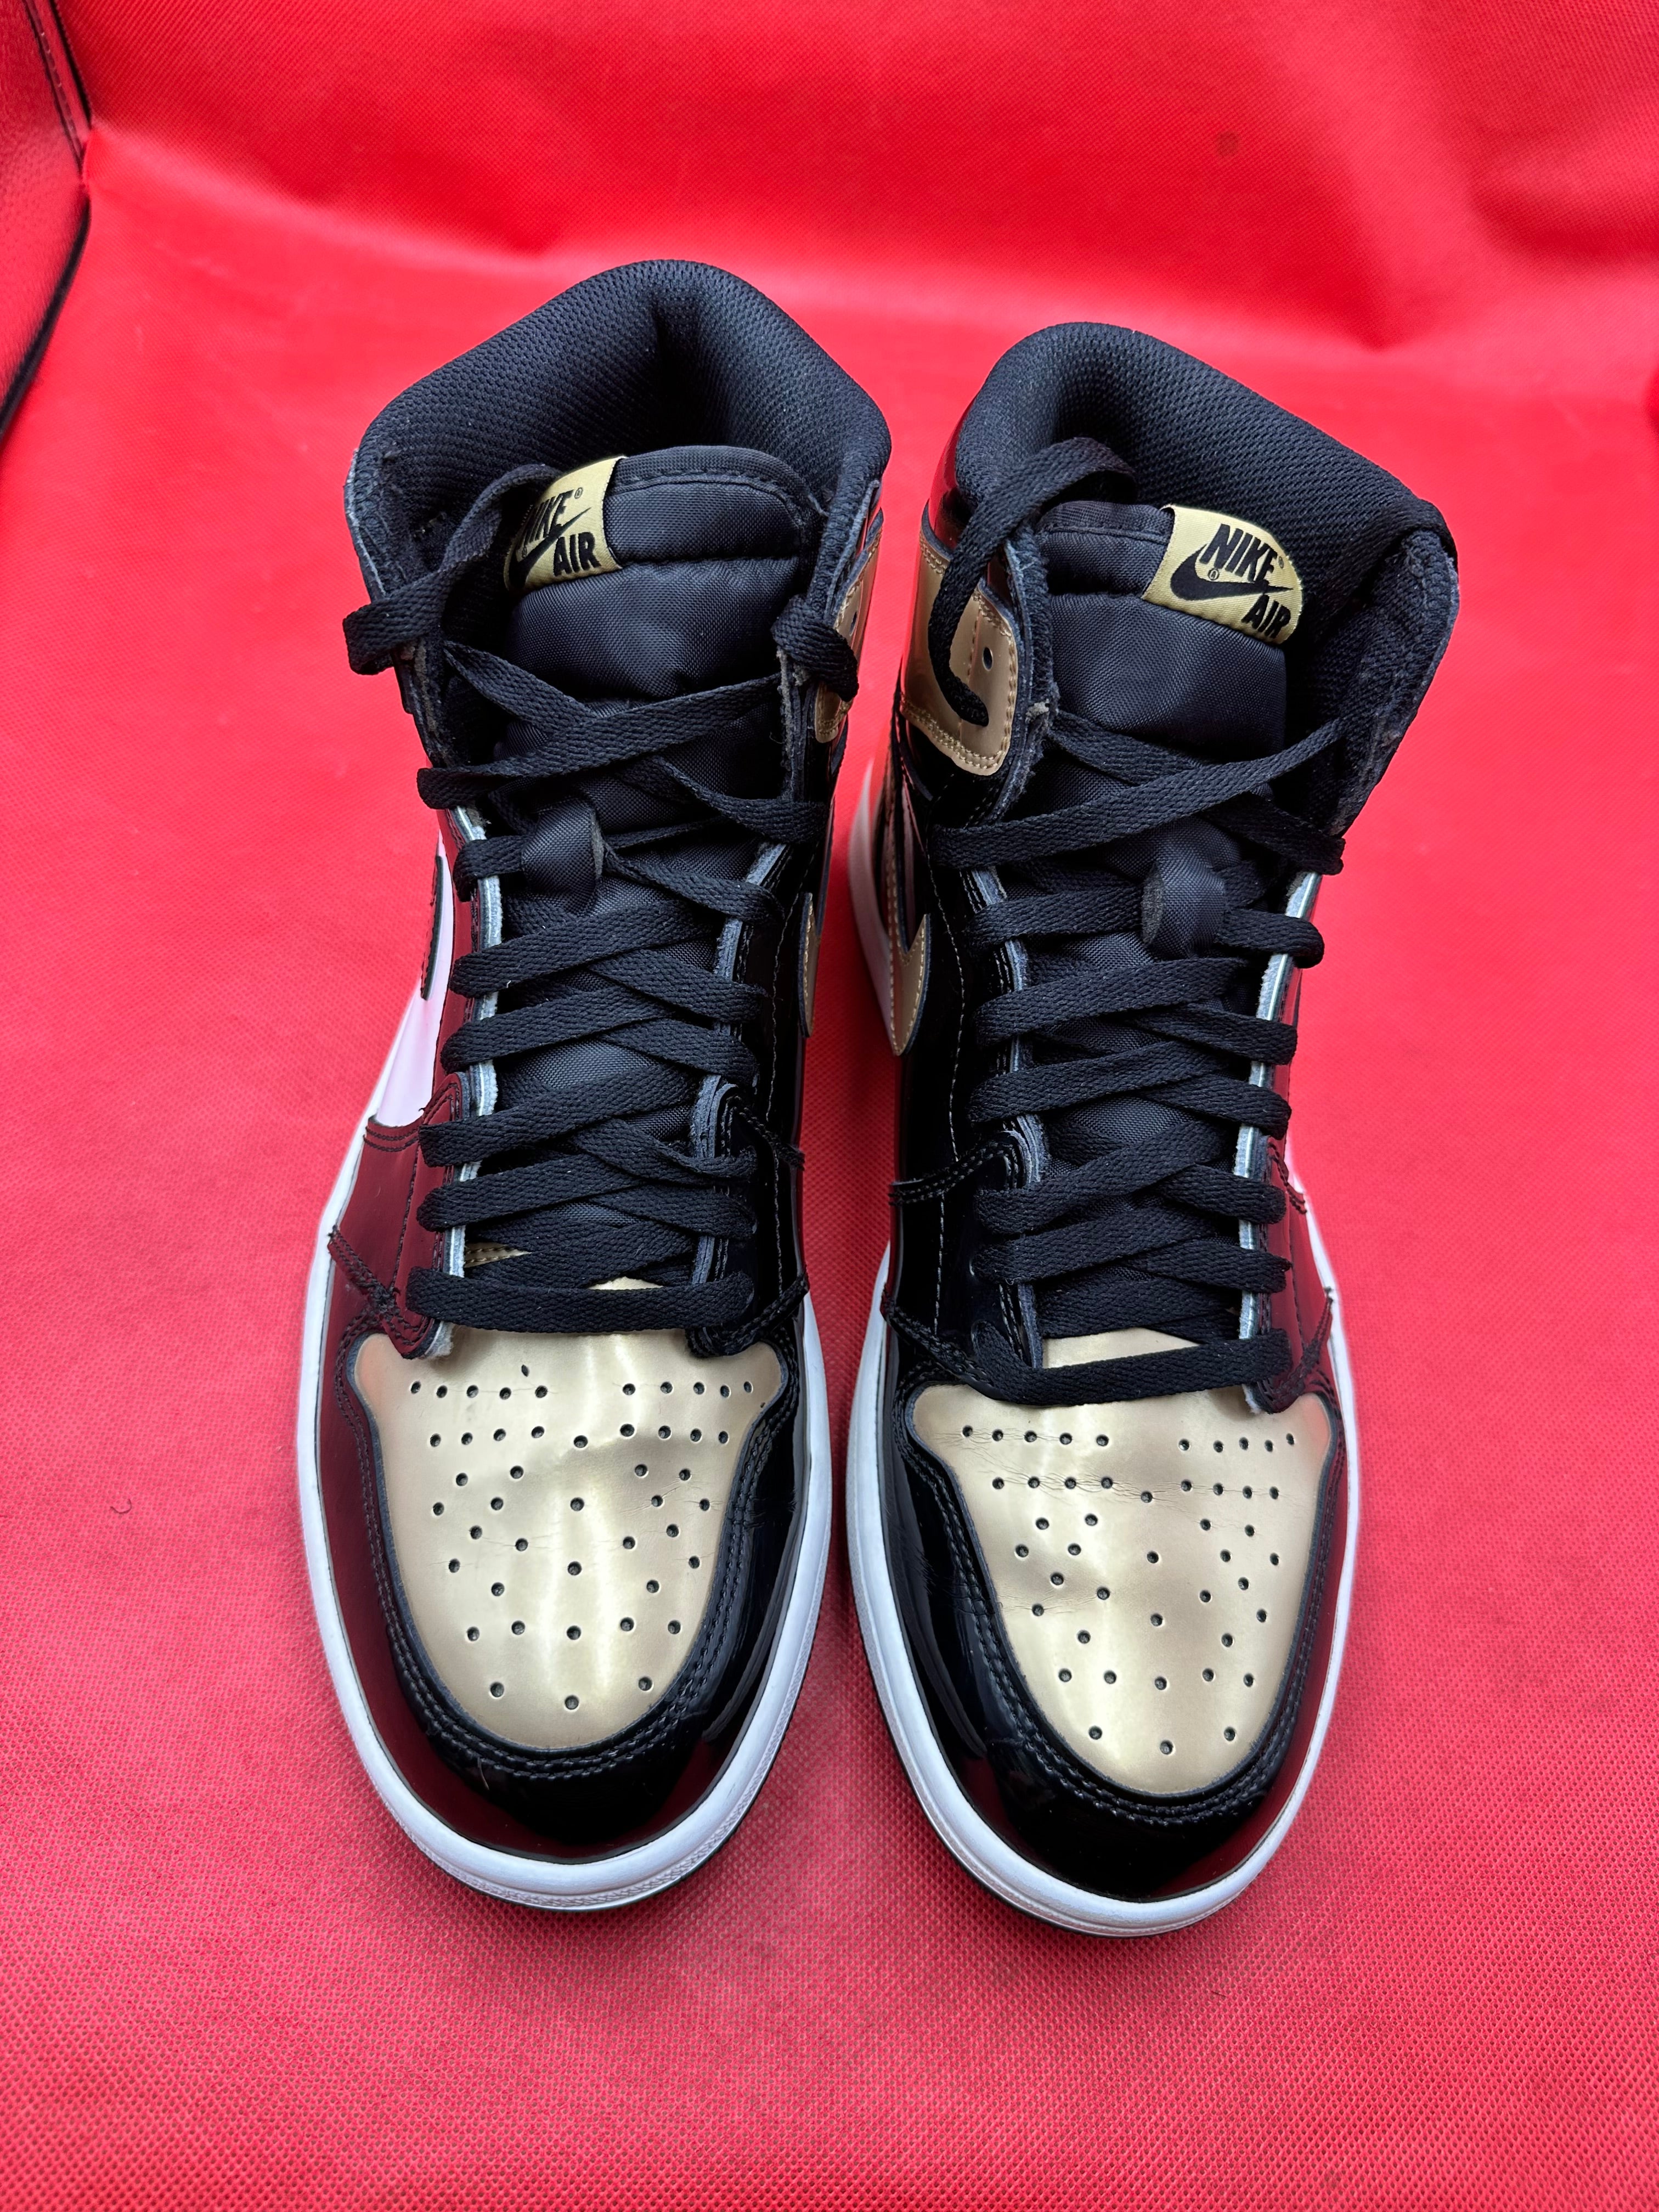 NRG Gold Toes 1s size 10.5